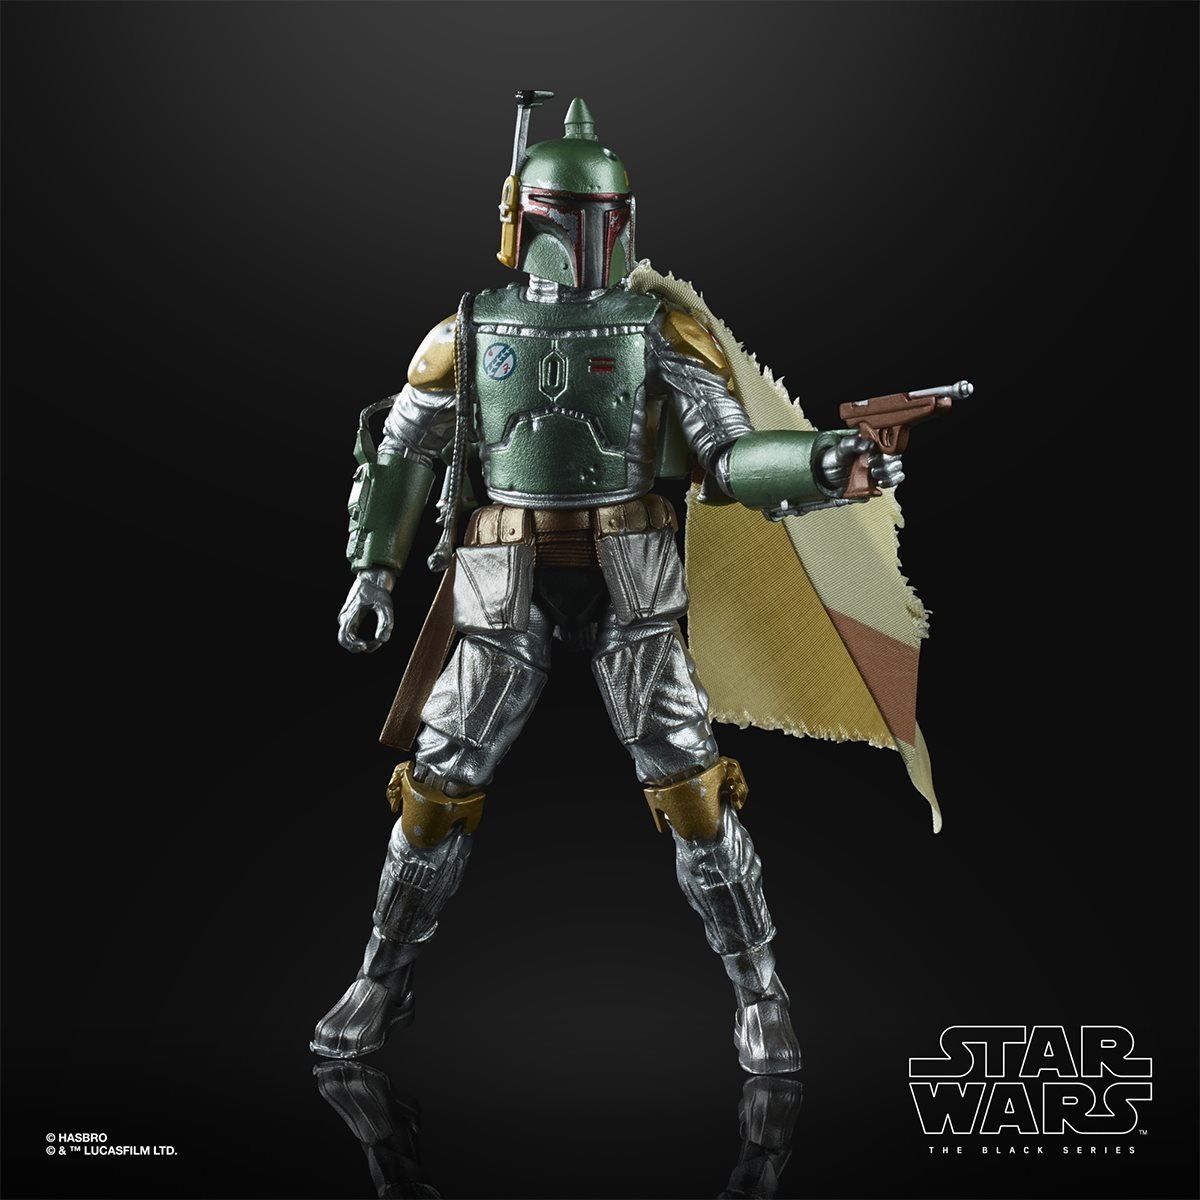 Star Wars The Black Series Carbonized Collection Boba Fett Toy Action Figure for sale online Hasbro E99275L0 